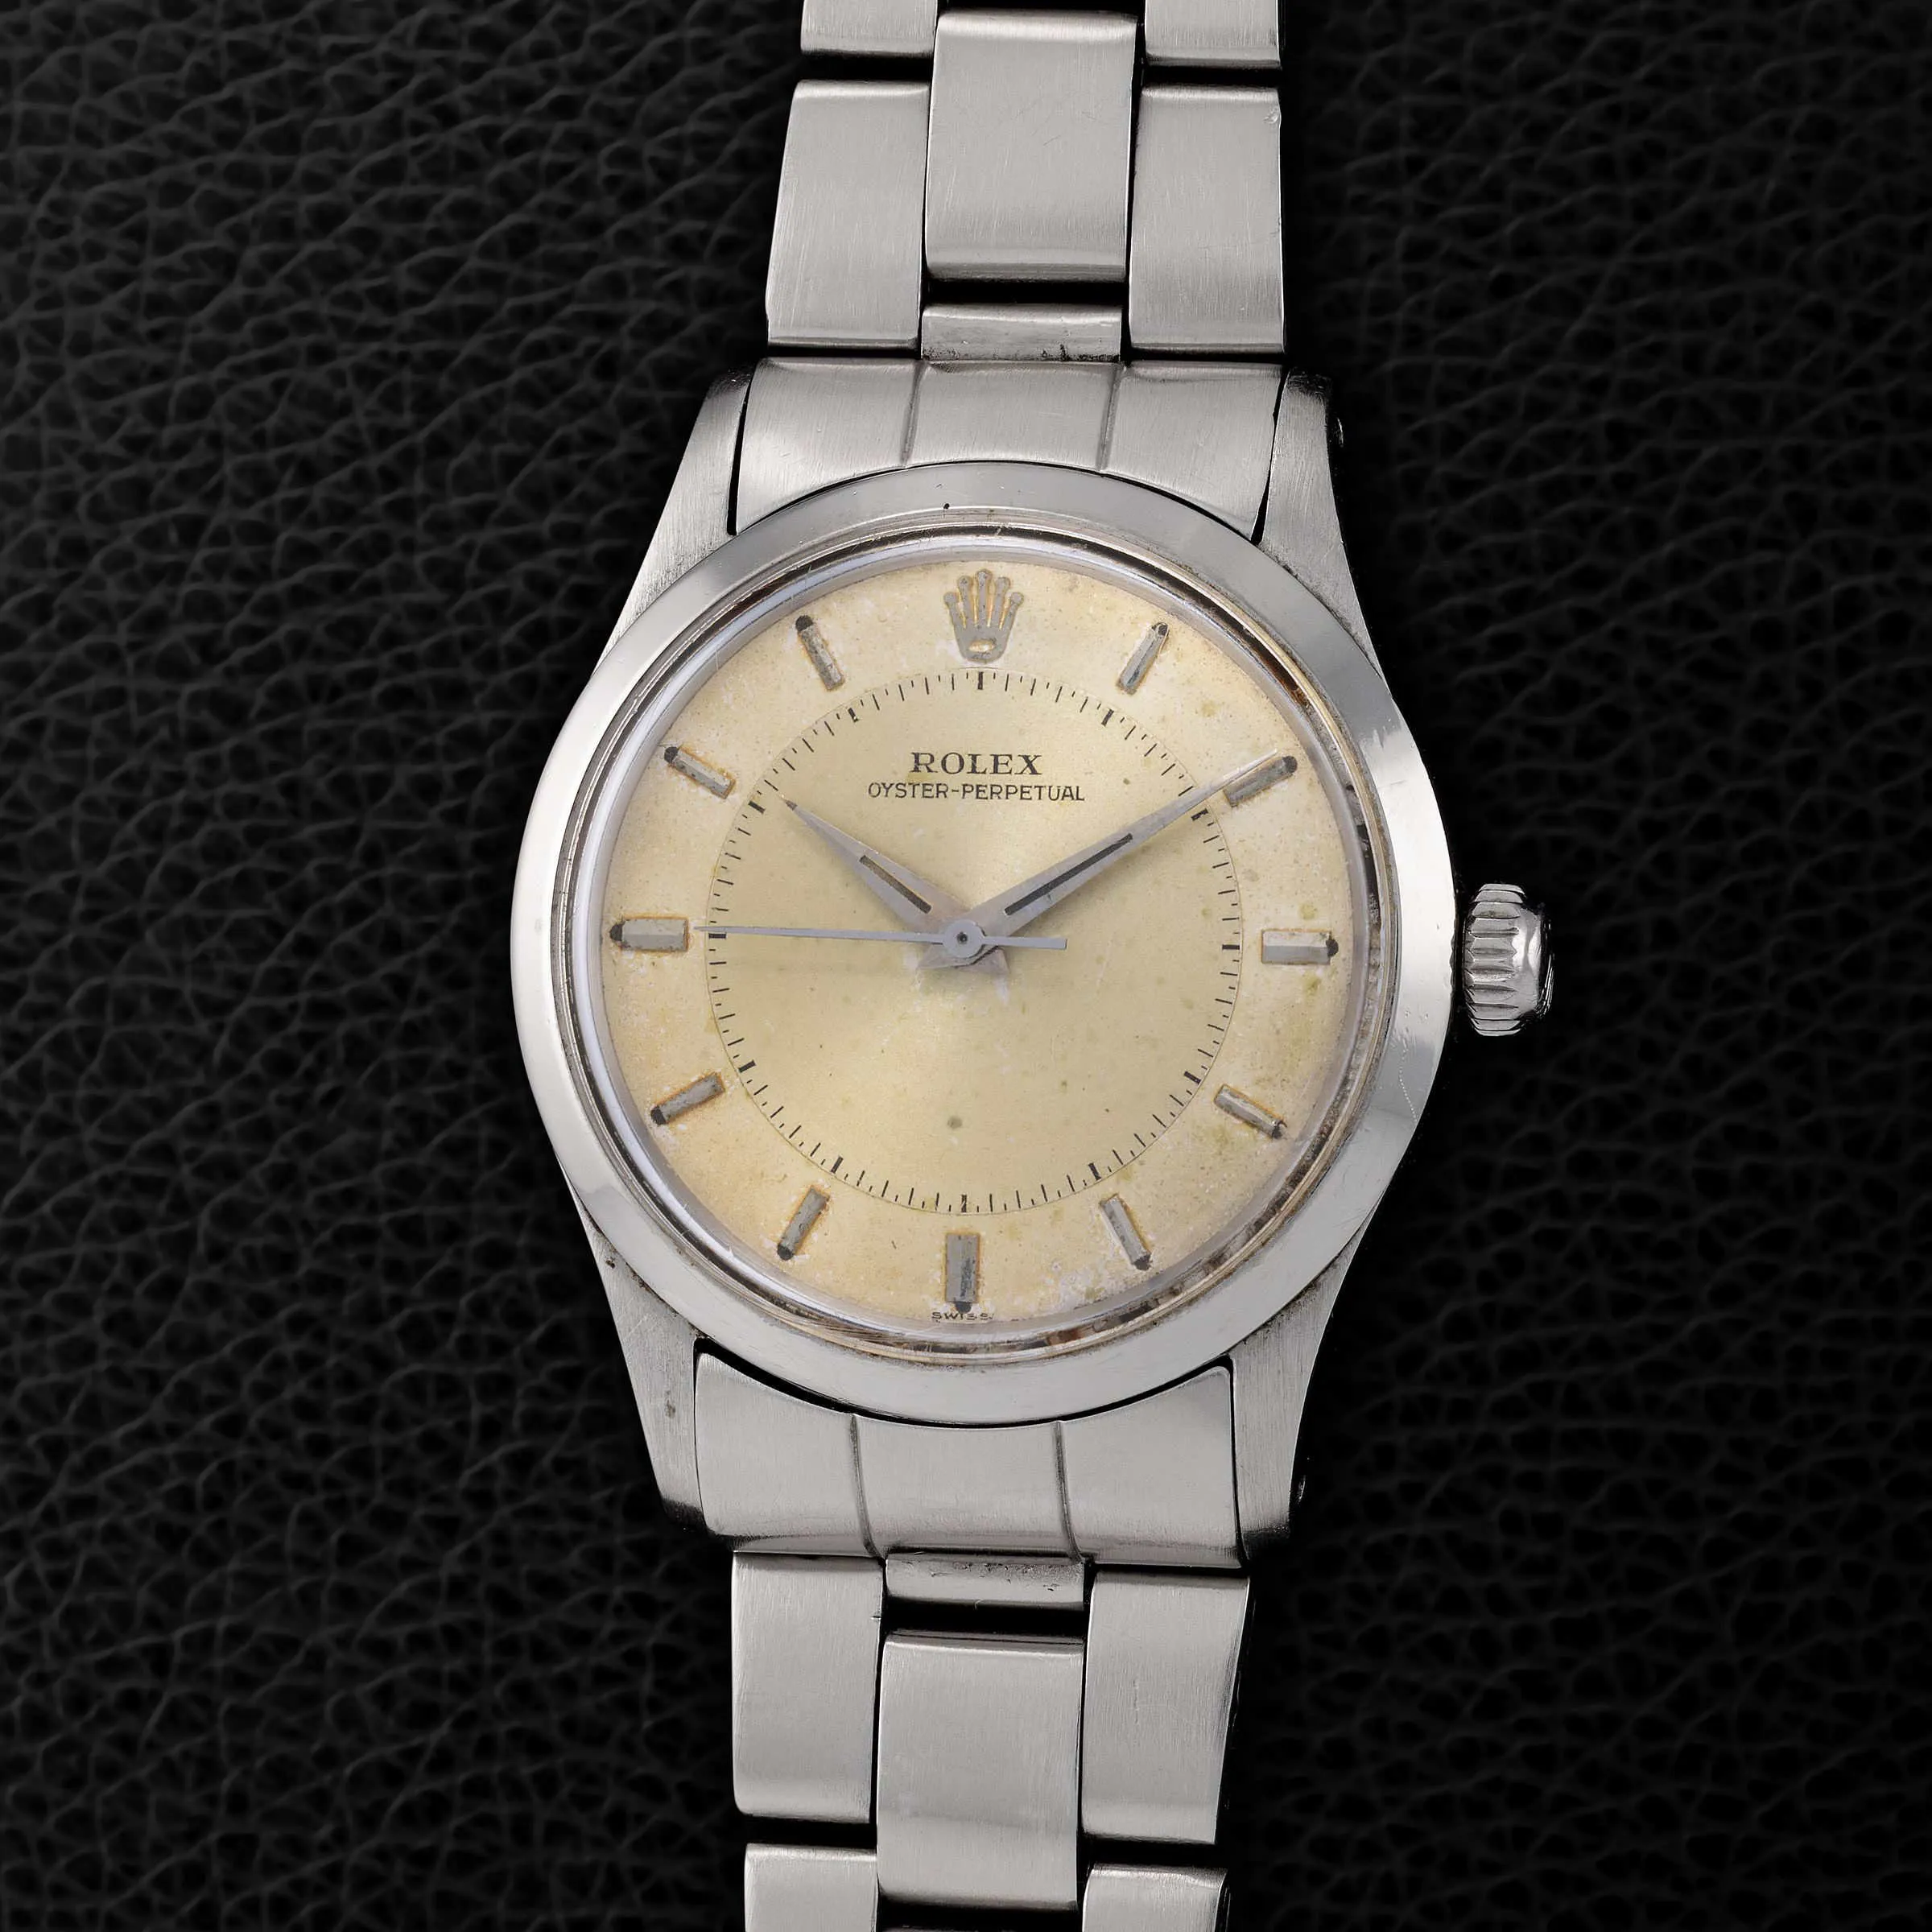 Rolex Oyster Perpetual 6532 34mm Stainless steel Silver